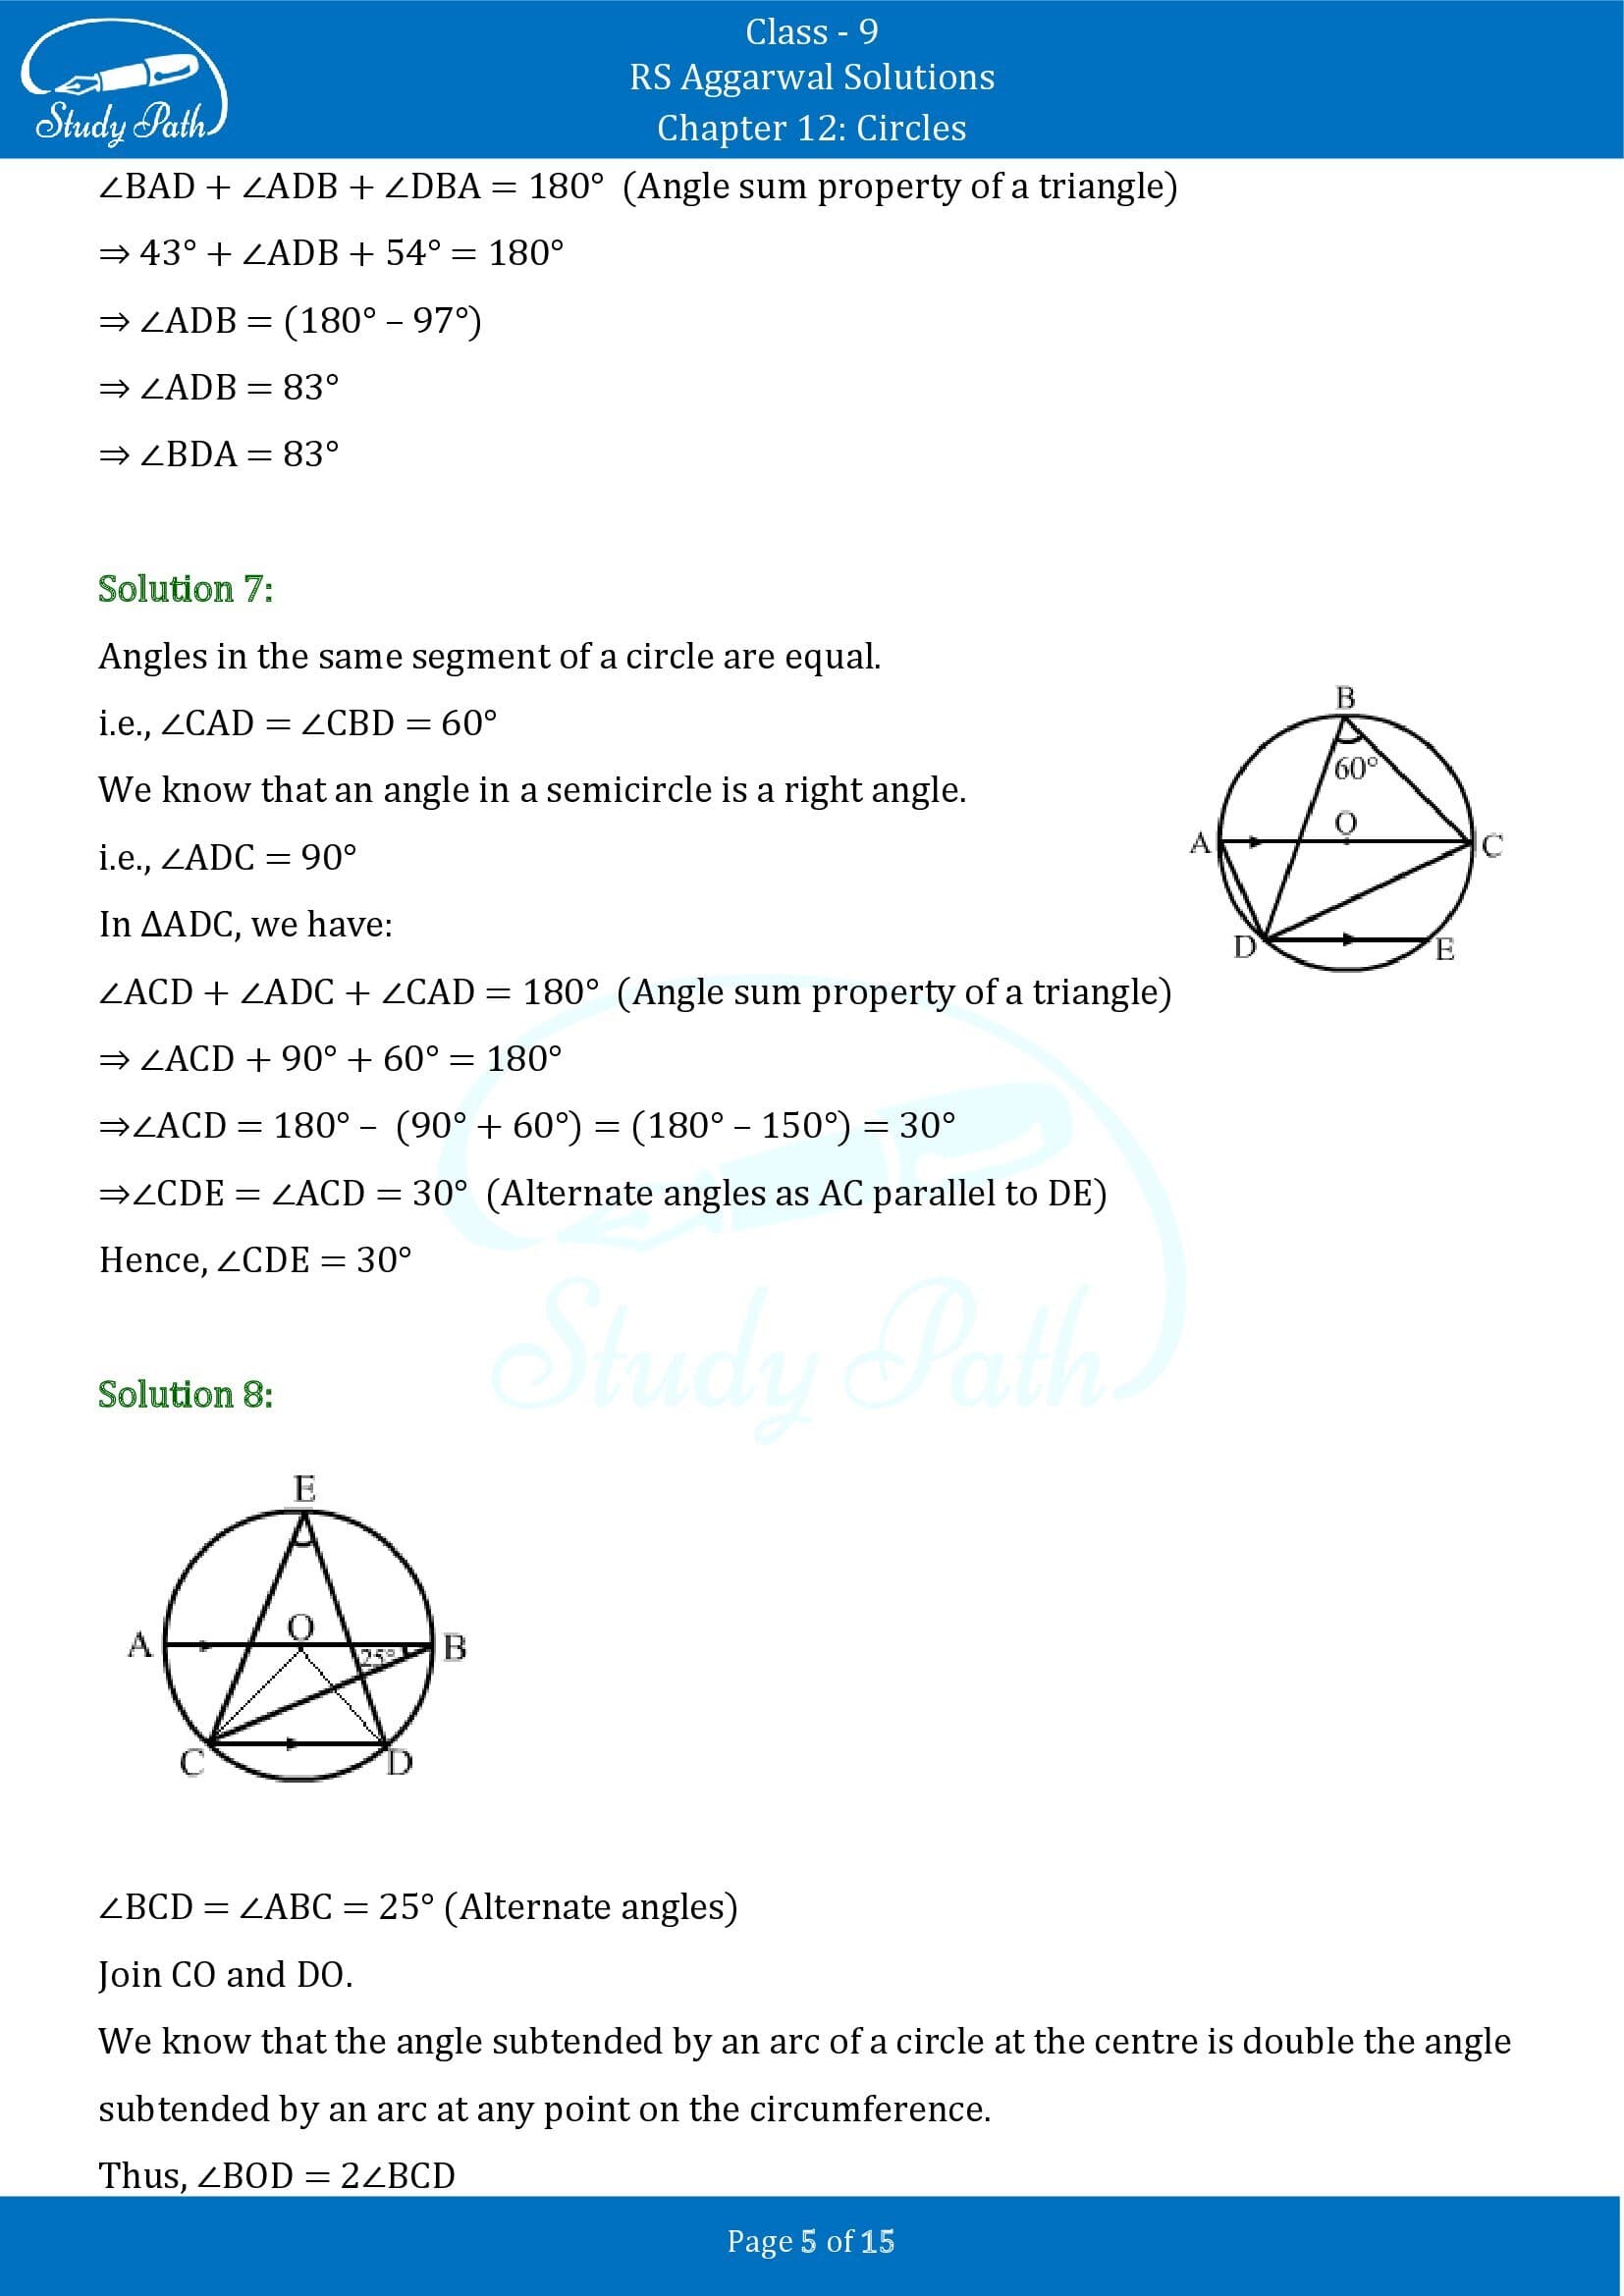 RS Aggarwal Solutions Class 9 Chapter 12 Circles Exercise 12B 00005